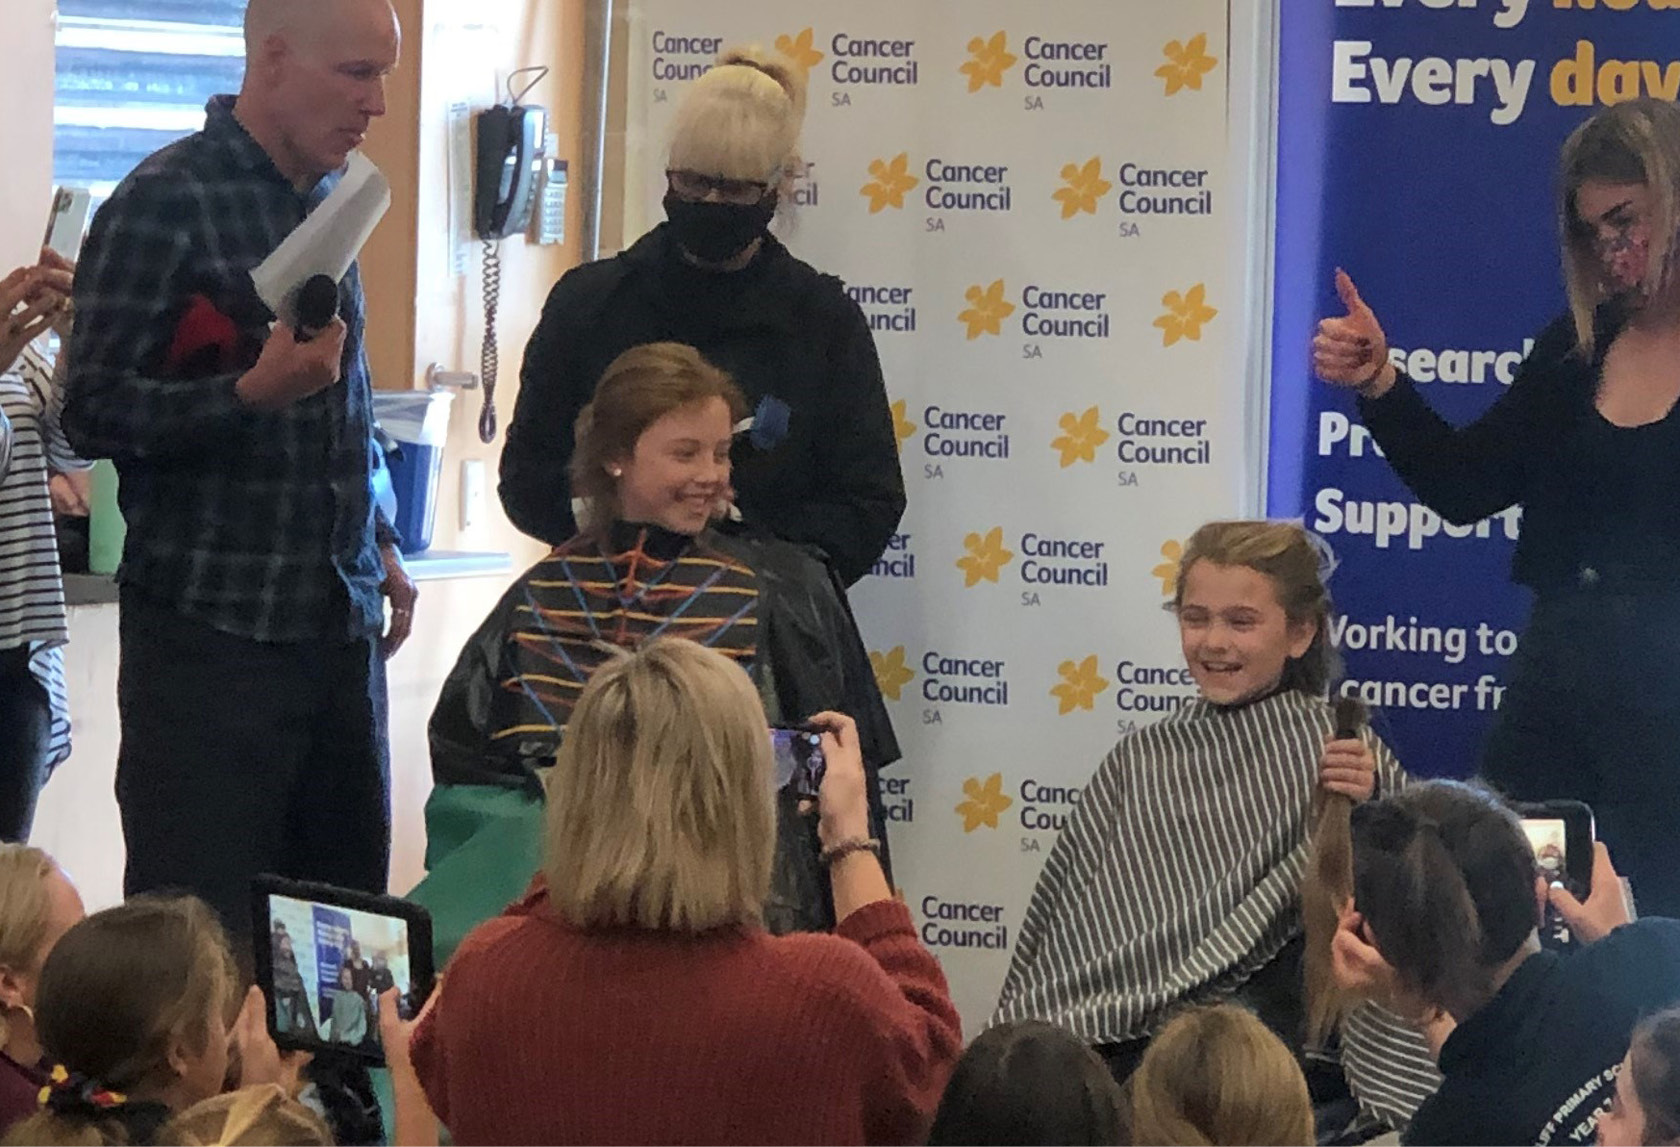 Group of kids cutting hair for cancer fundraiser